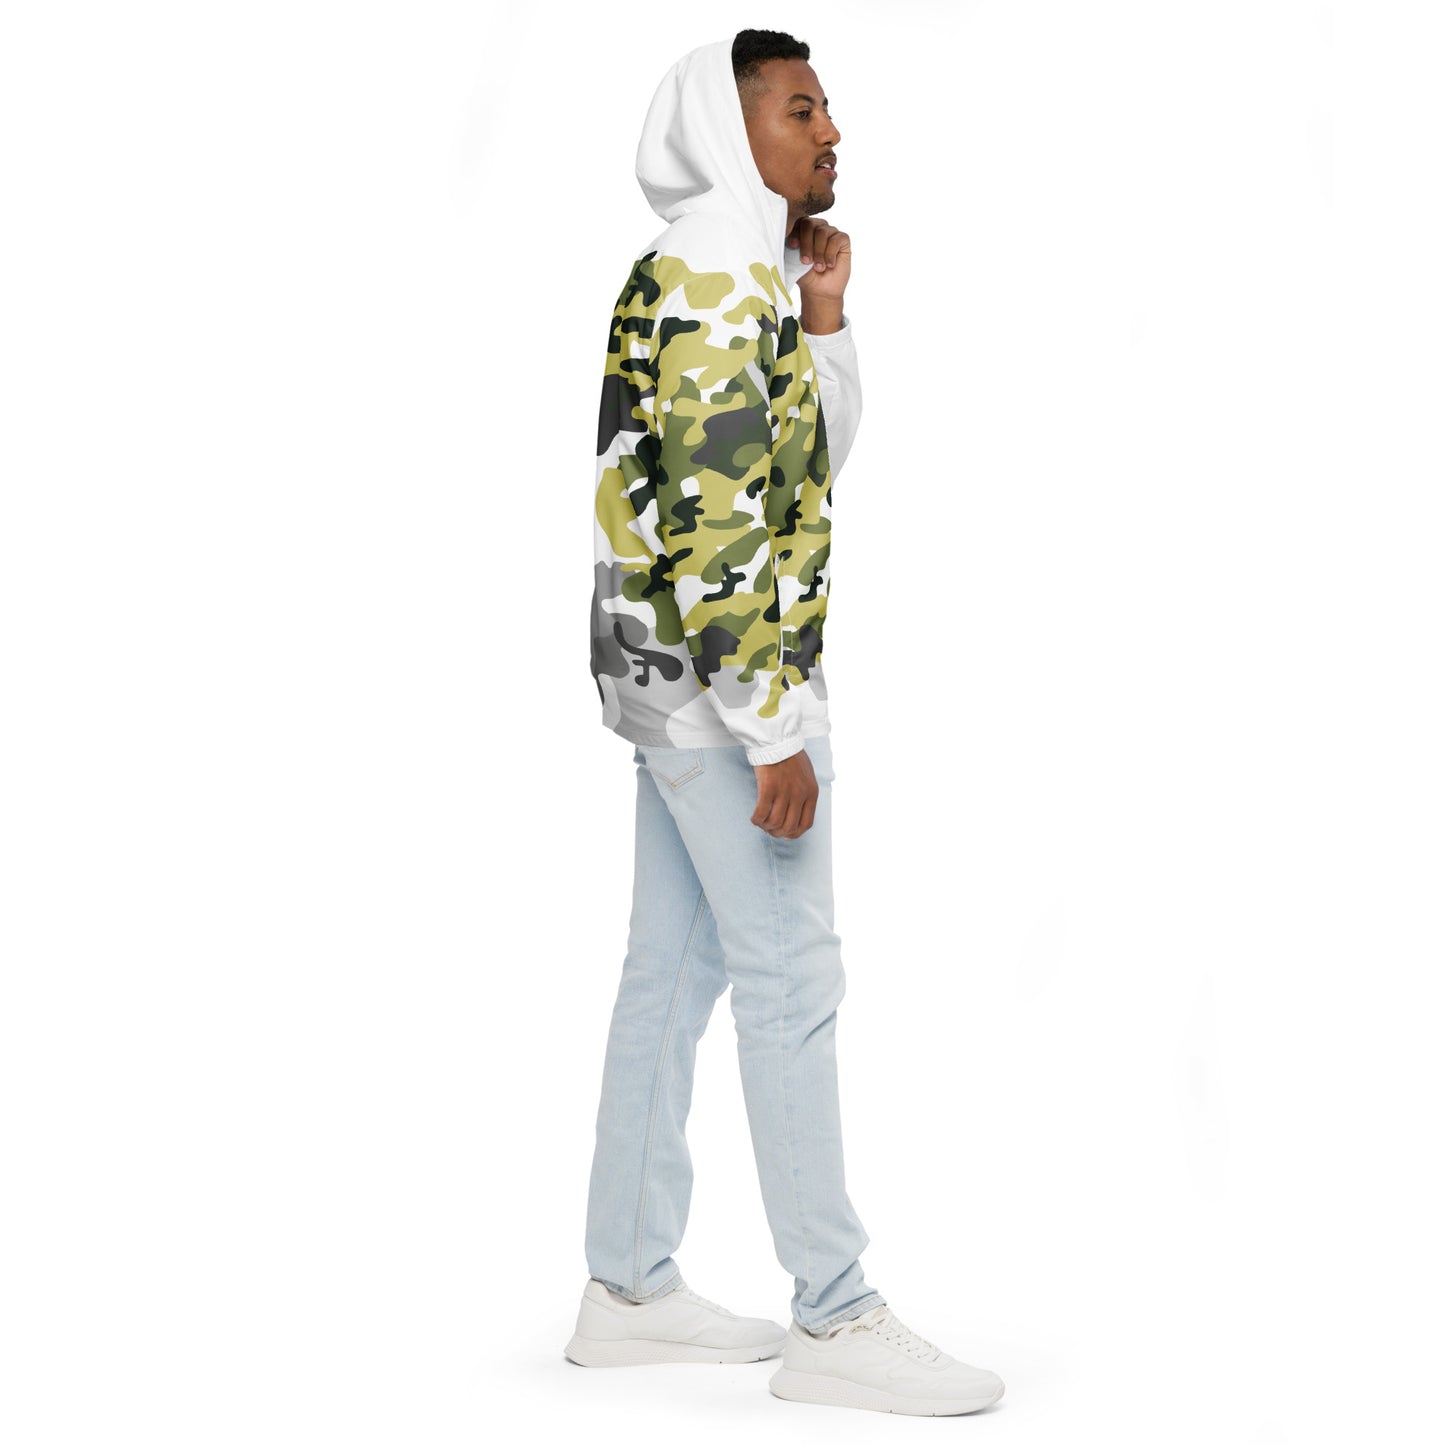 TIME OF VIBES - Men's Windbreaker CAMOUFLAGE (White) - €99.00